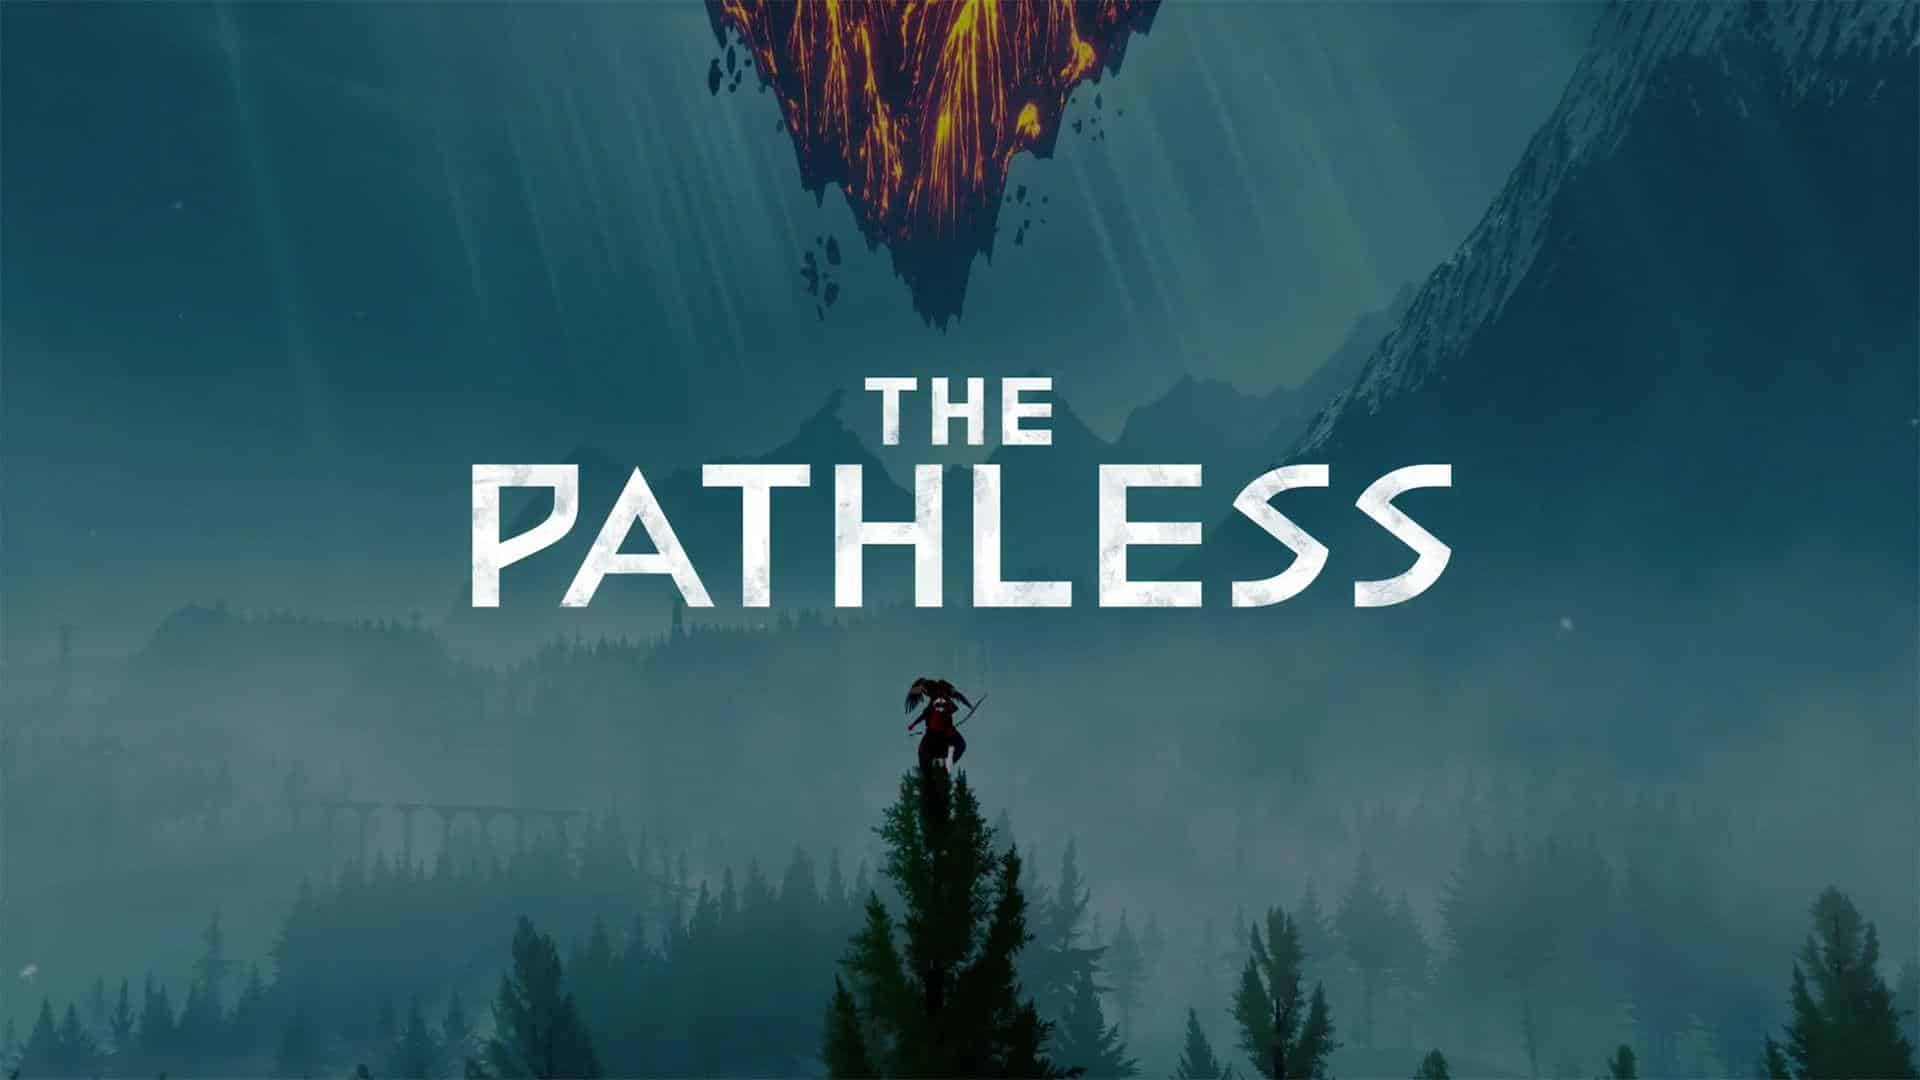 download the pathless ps5 metacritic for free